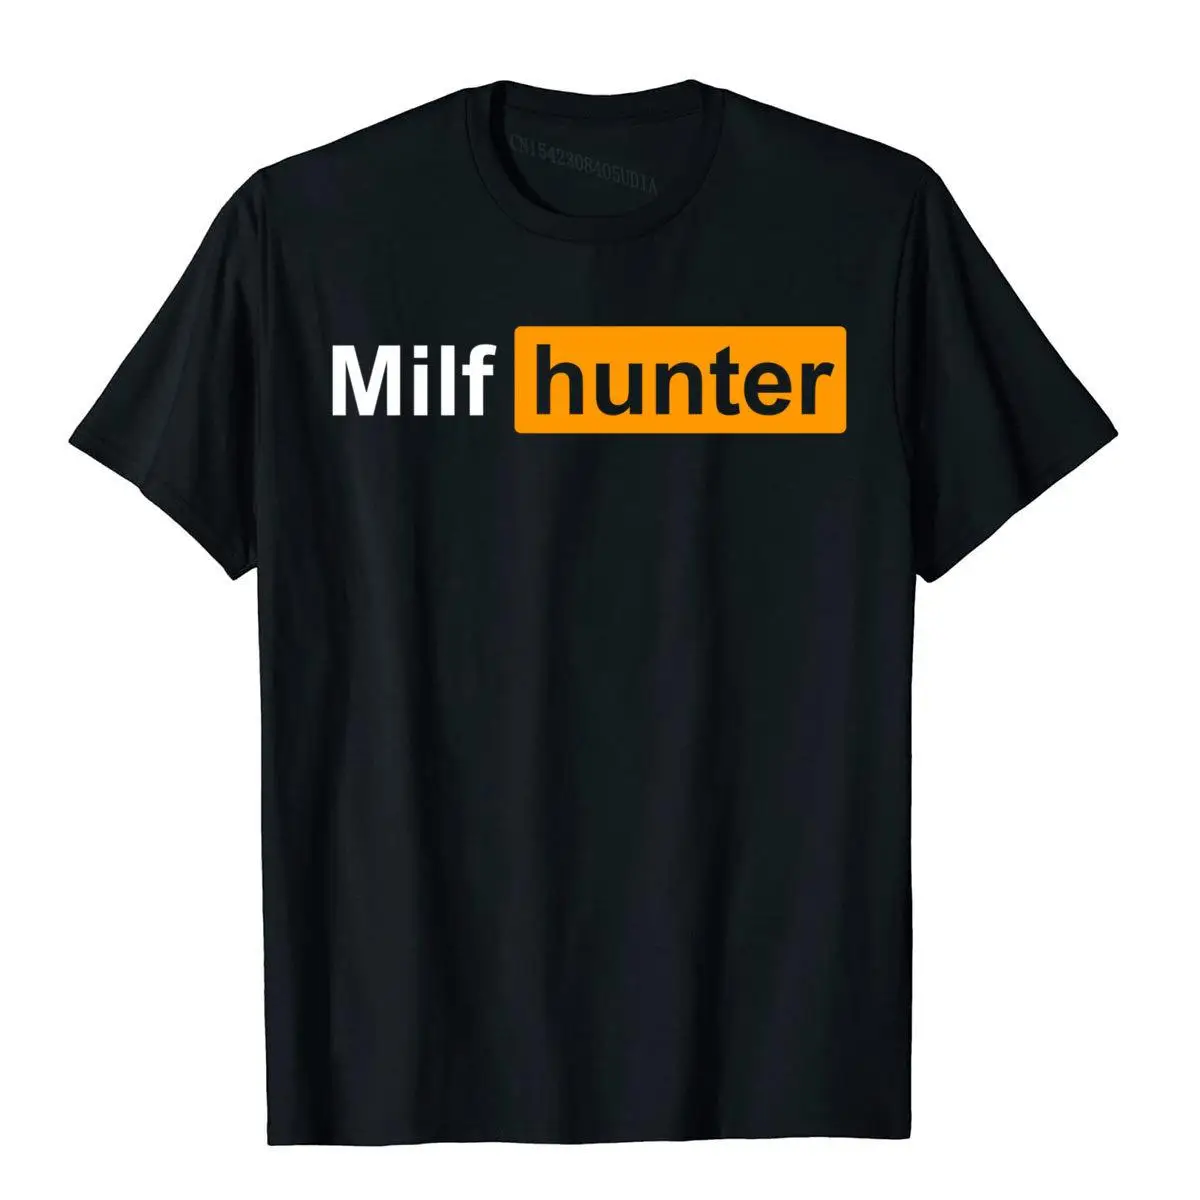 

MILF Hunter Funny Adult Humor Joke For Men Who Love Milfs Graphic Top T-Shirts Tops Shirts Brand New Cotton Holiday Tight Adult